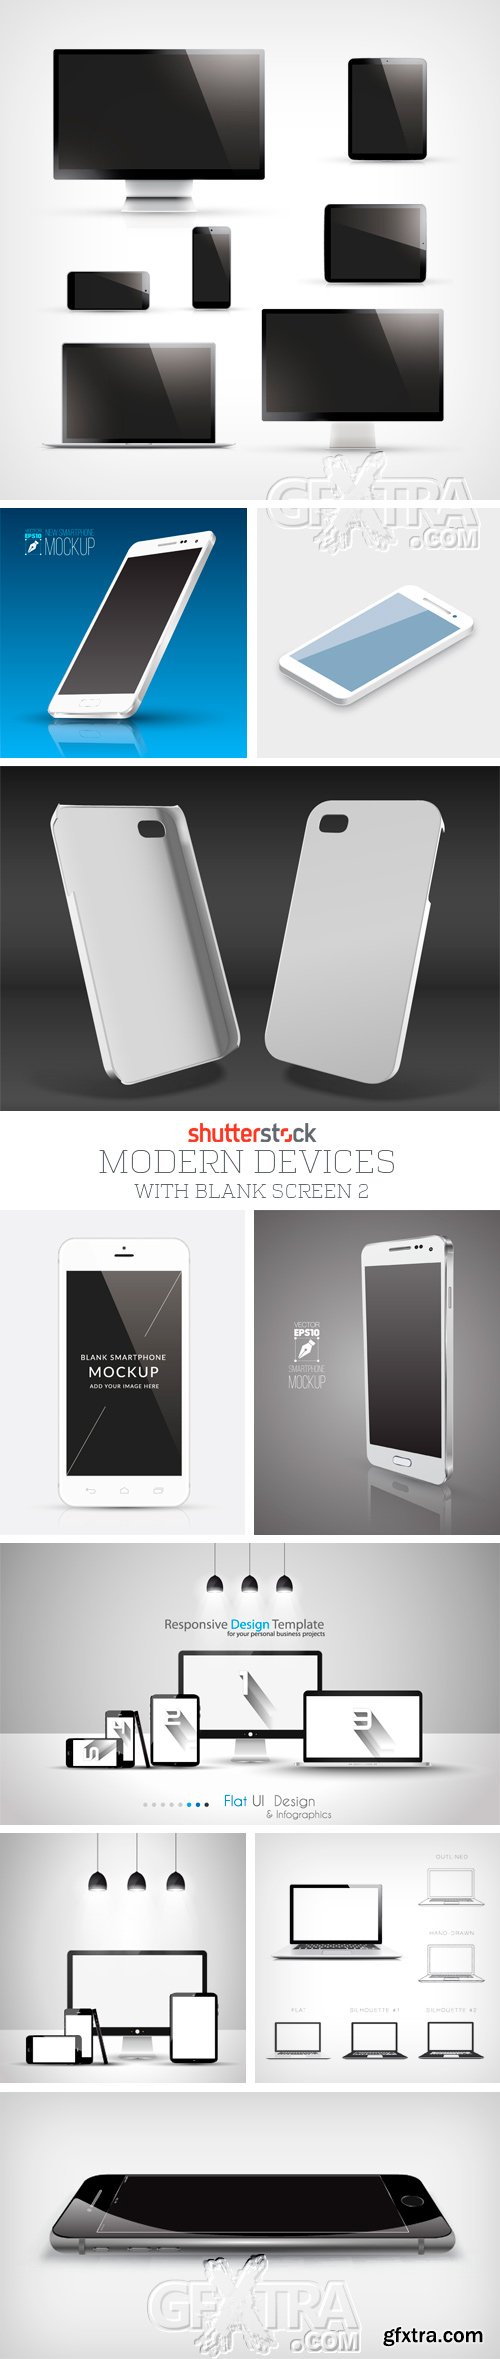 Amazing SS - Modern Devices with Blank Screen 2, 25xEPS